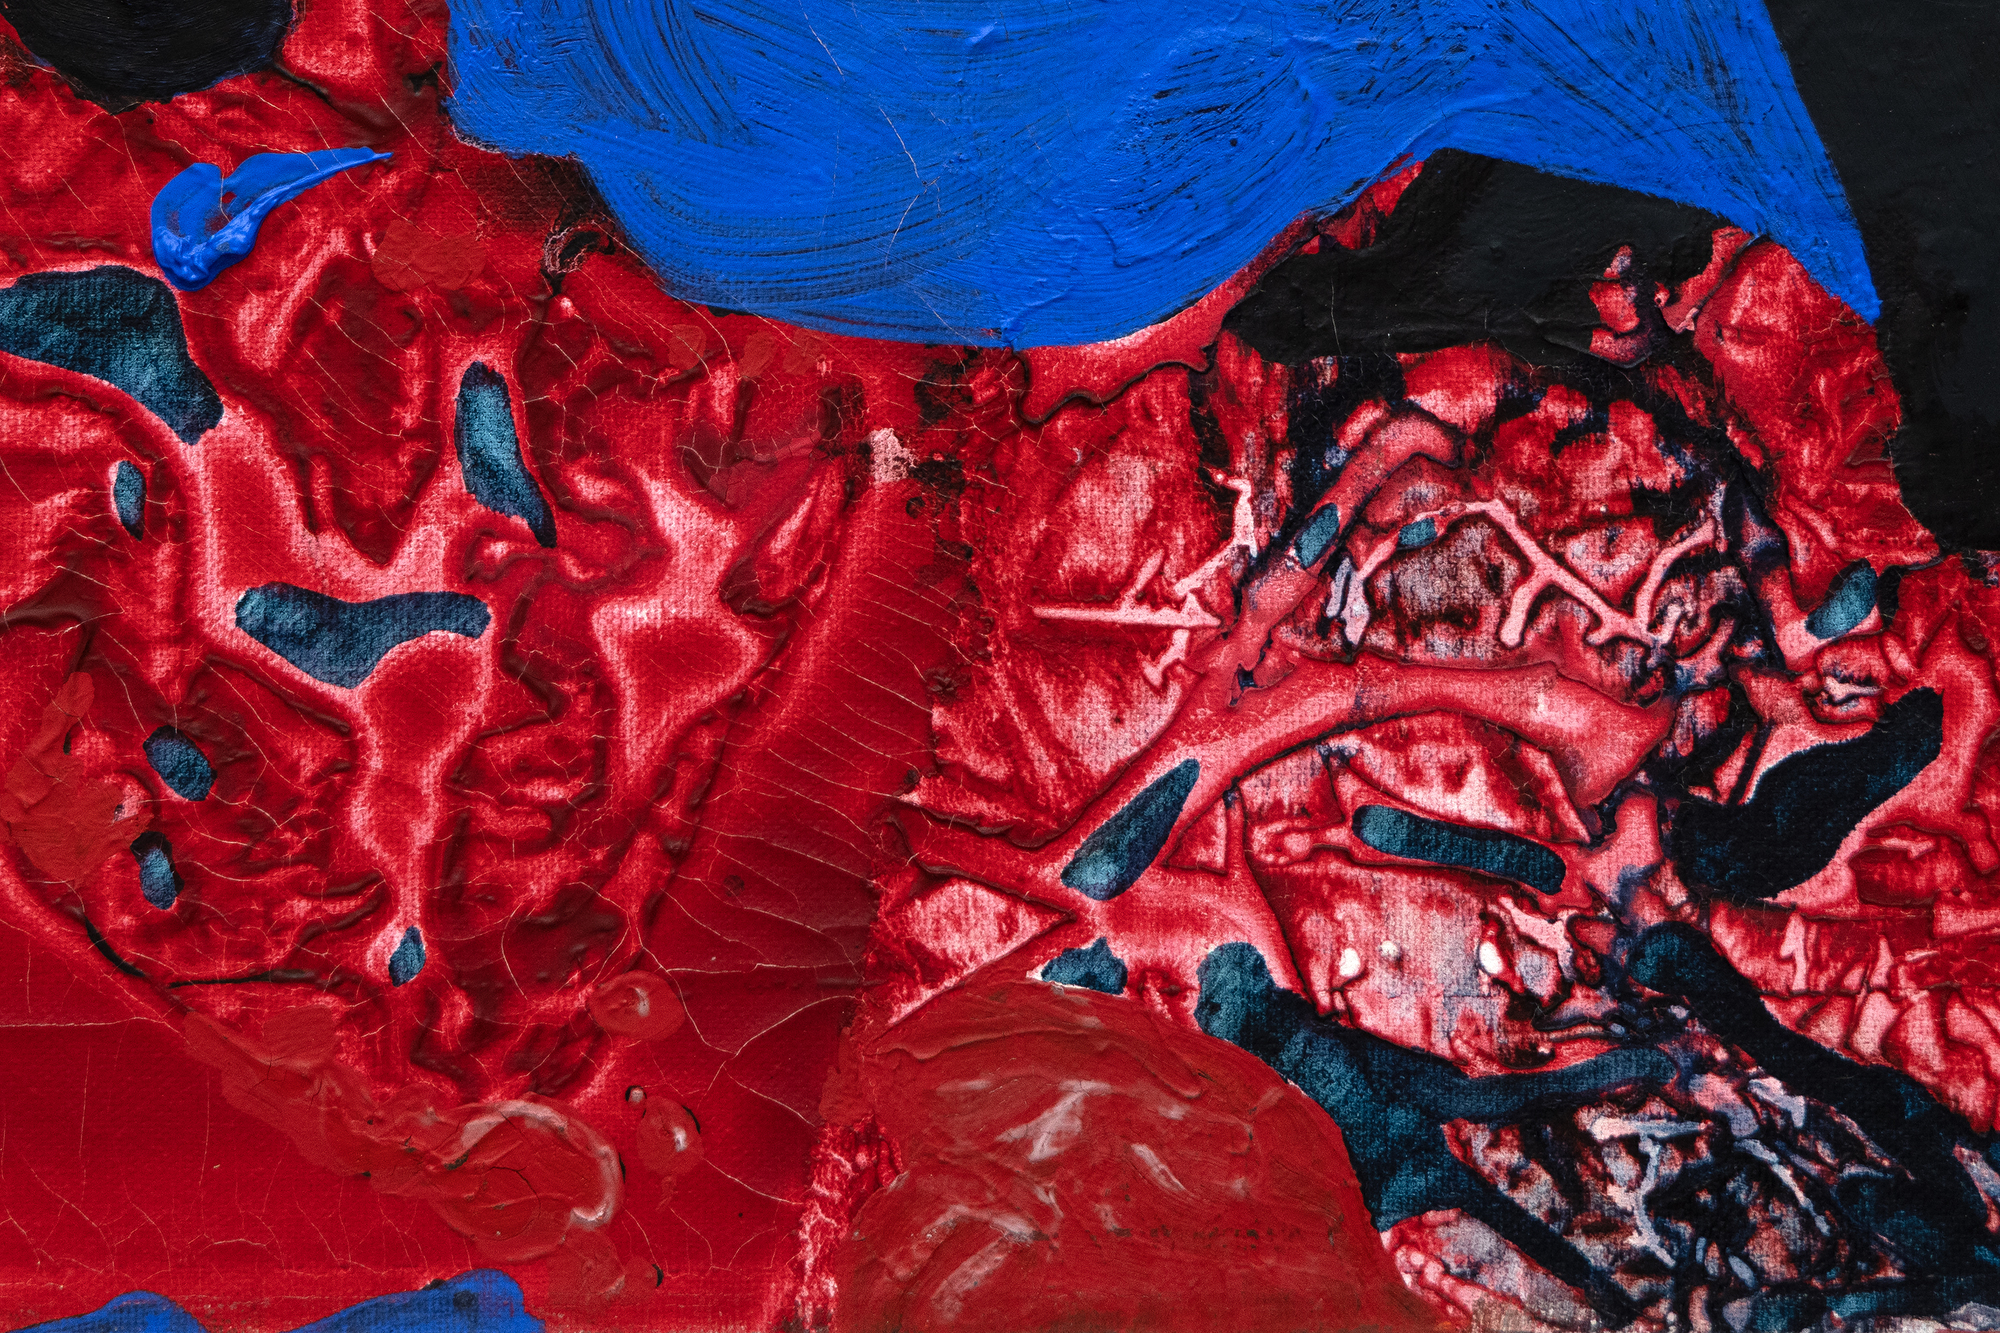 During the 1980s and '90s, Hood's devotion to the idea of emptiness did not find favor among a generation ruled by Neo-Pop, Postmodernism, or the debate over the validity of appropriation art. Walter Darby Bannard, an established Color Field painter, recognized Dorothy Hood's enormous talent and advised her to abandon her esoteric interest in something without limits and beyond comprehension. Hood, as we know, stood her ground. As she stated, "Black can be painted to express a great light, for in the void of blackness arises all beginning. Forms are in gravity, or they are suspended without time, or the rush of movement." Hood's virtuosity in handling black is on full display with Untitled (Black Beauty), a masterwork most potent when viewed through the lens of her relentless quest to discover cosmic unity.